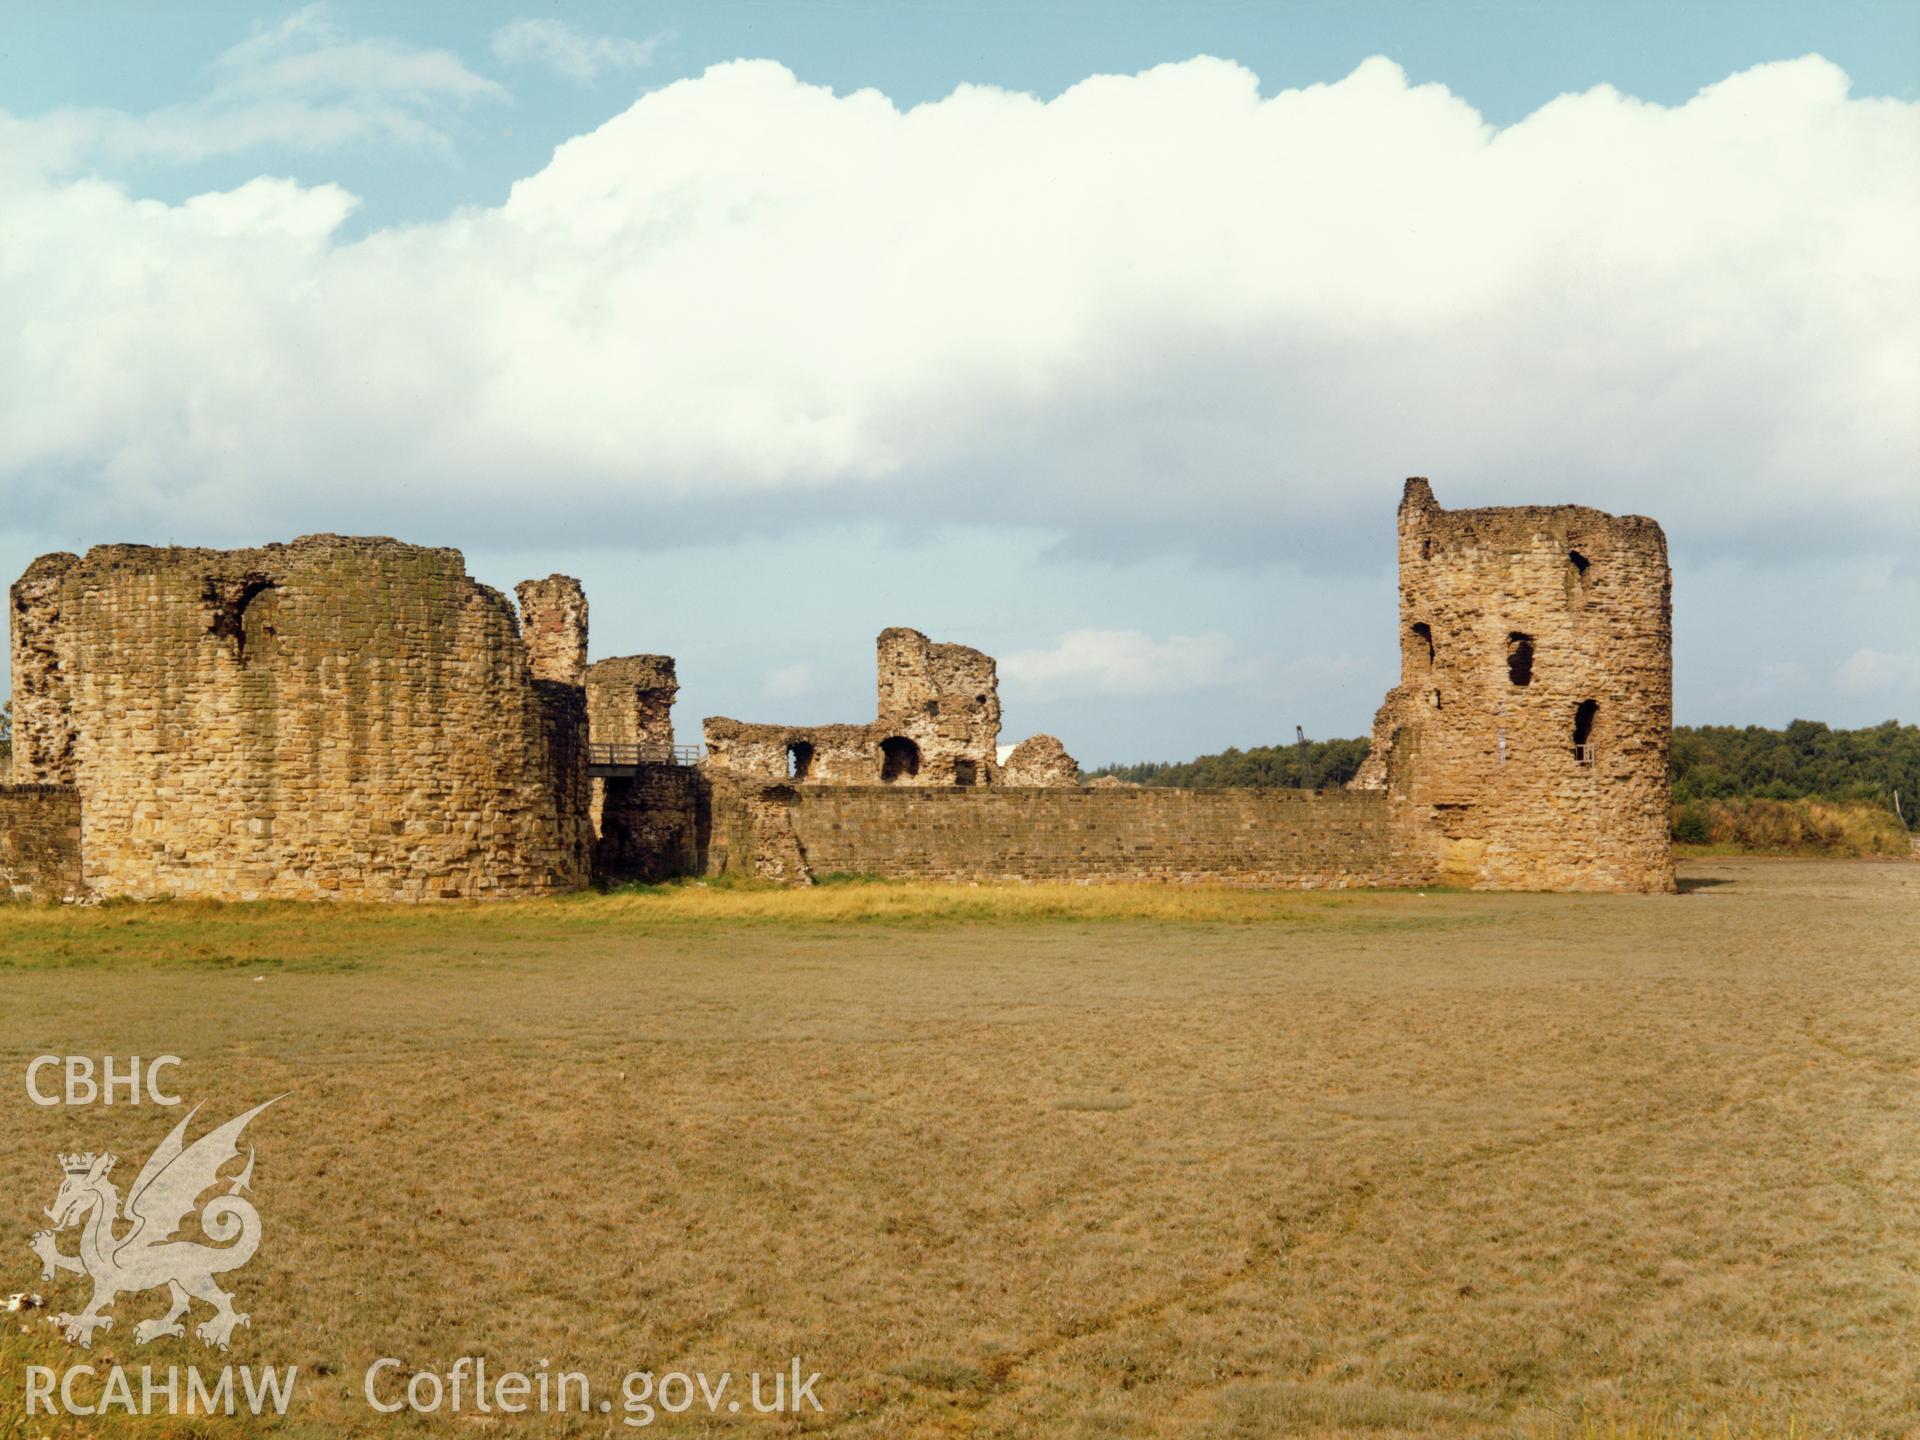 1 colour print showing view of Flint castle, collated by the former Central Office of Information.